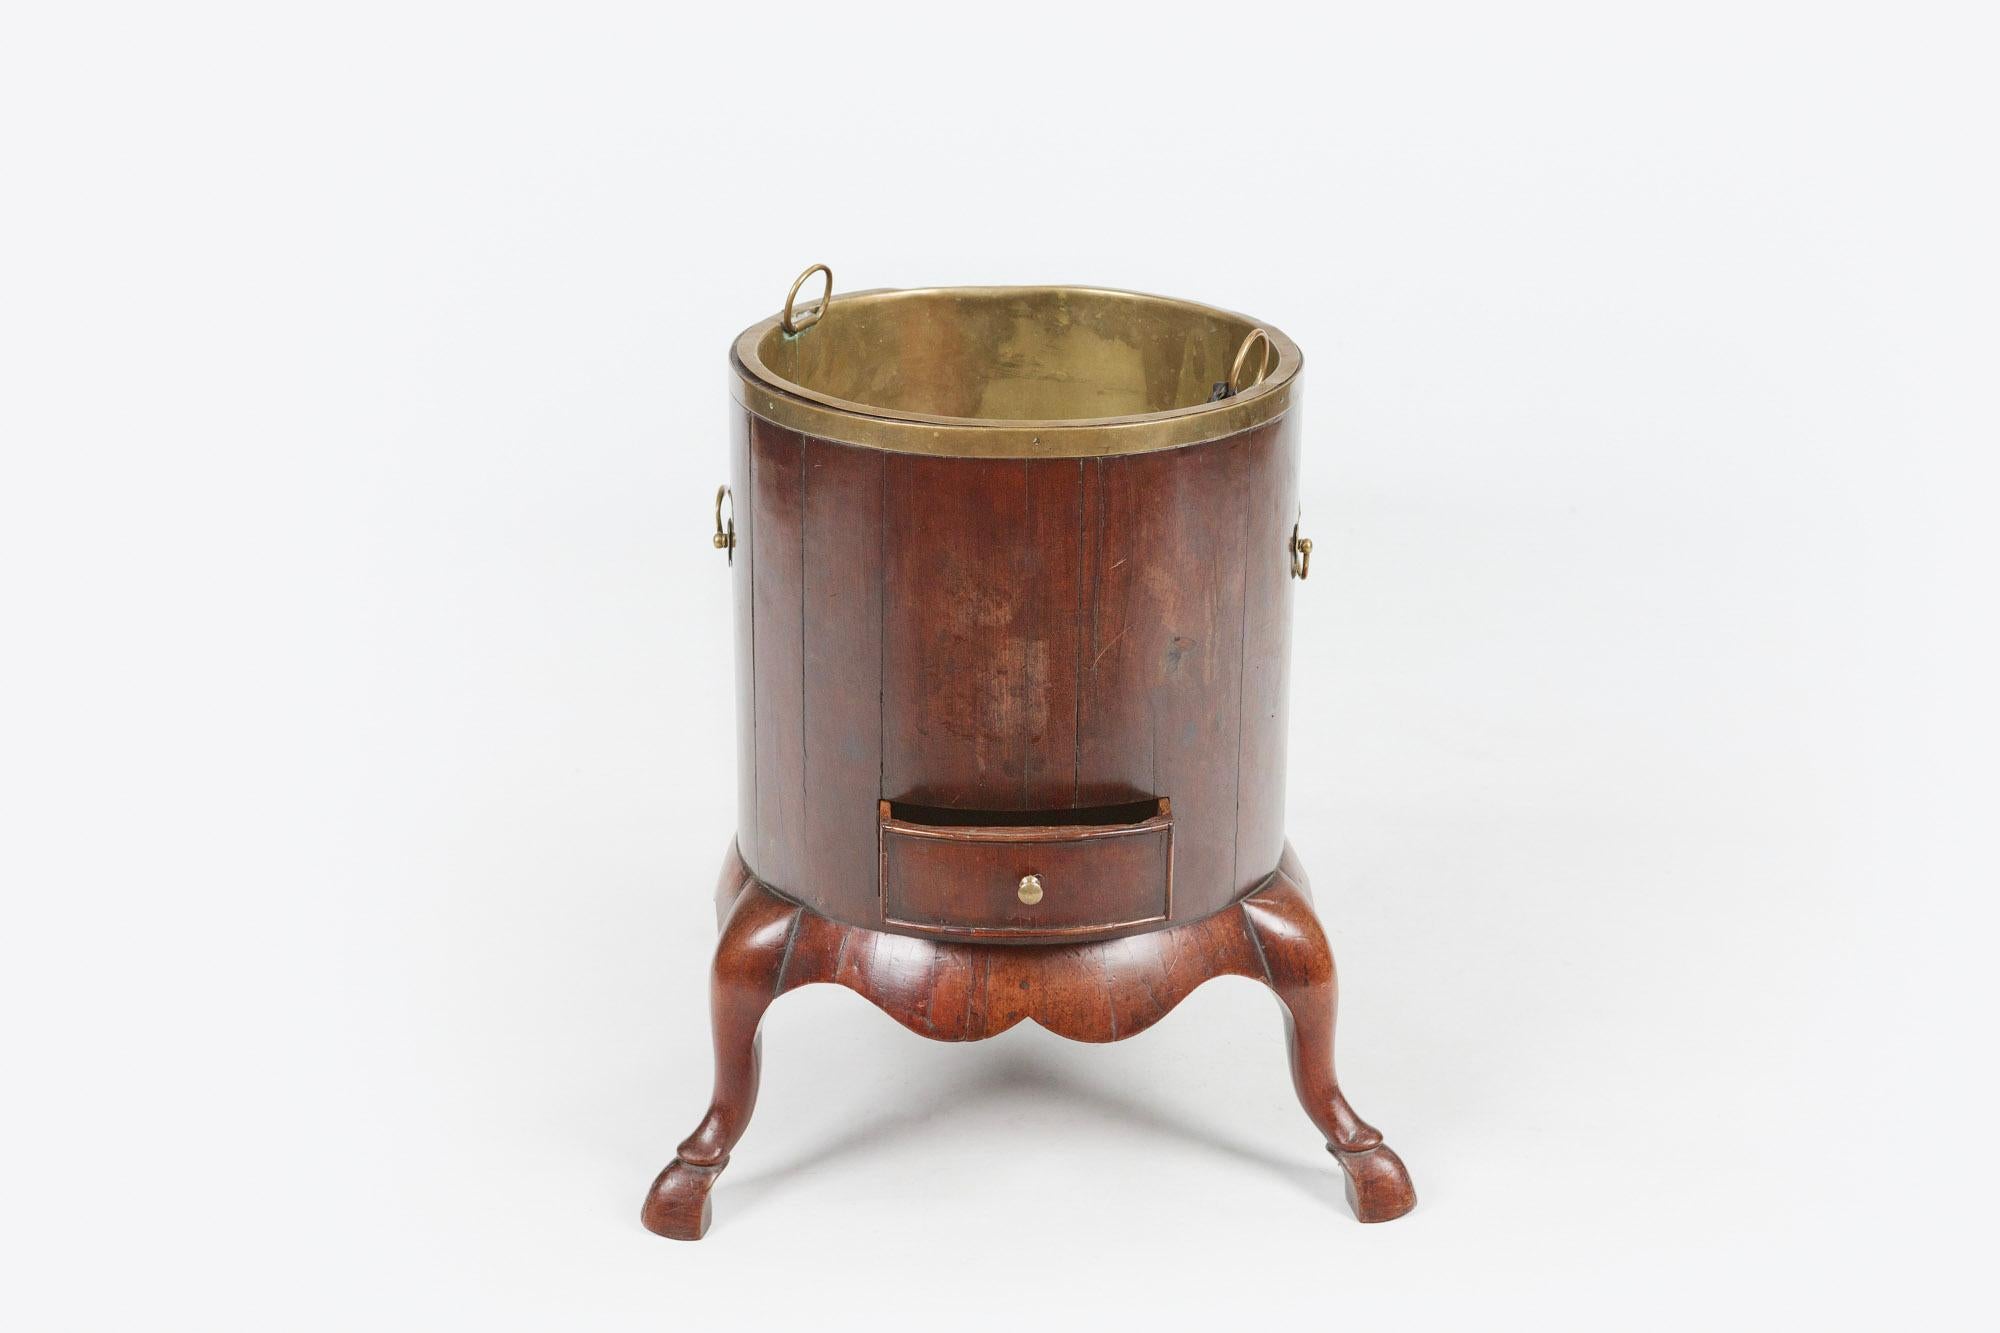 18th century George III mahogany brass bound wine cooler or planter of circular form with decorative brass carrying handles and brass insert with single cockbeaded drawer raised over shaped apron supported on three cabriole legs terminating on Manx